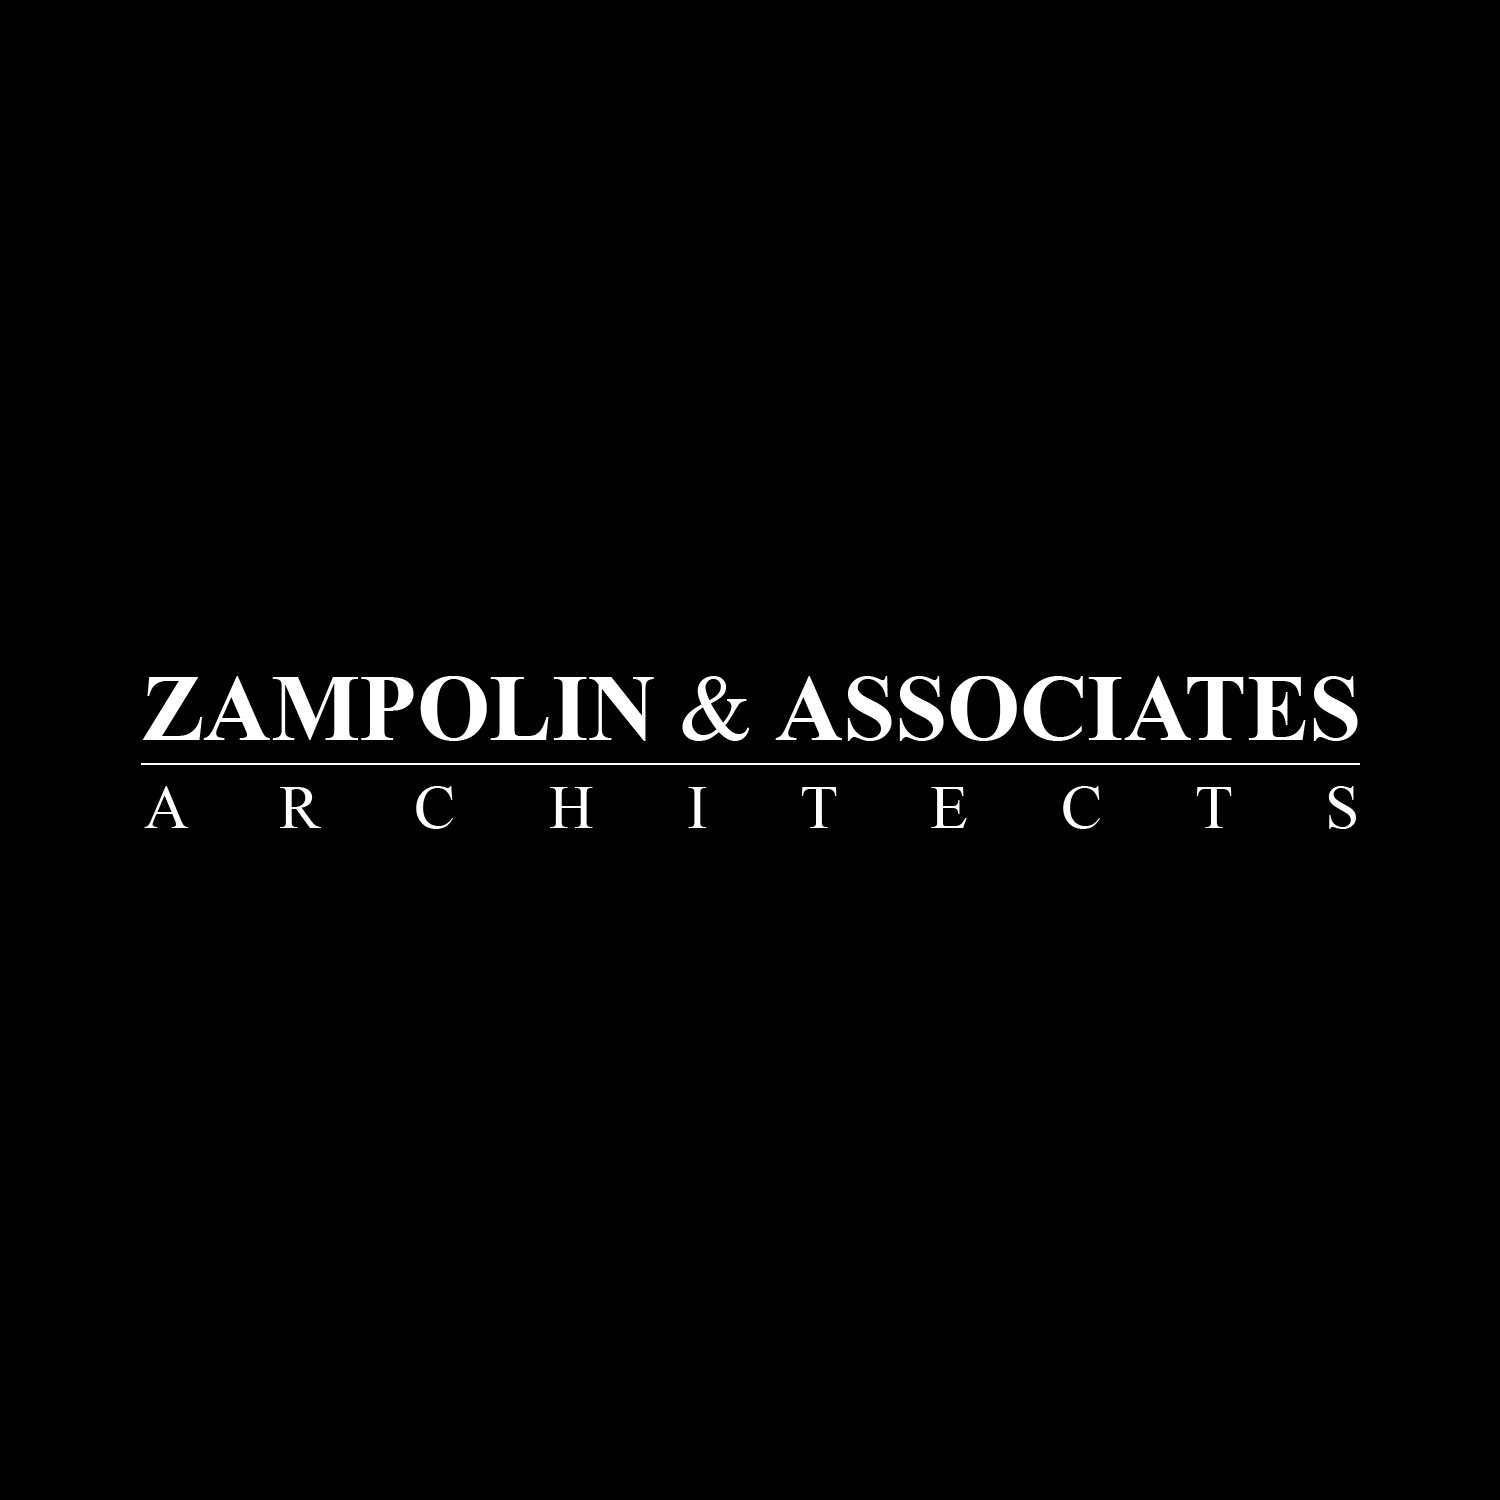 Our Services — Zampolin & Associates Architects